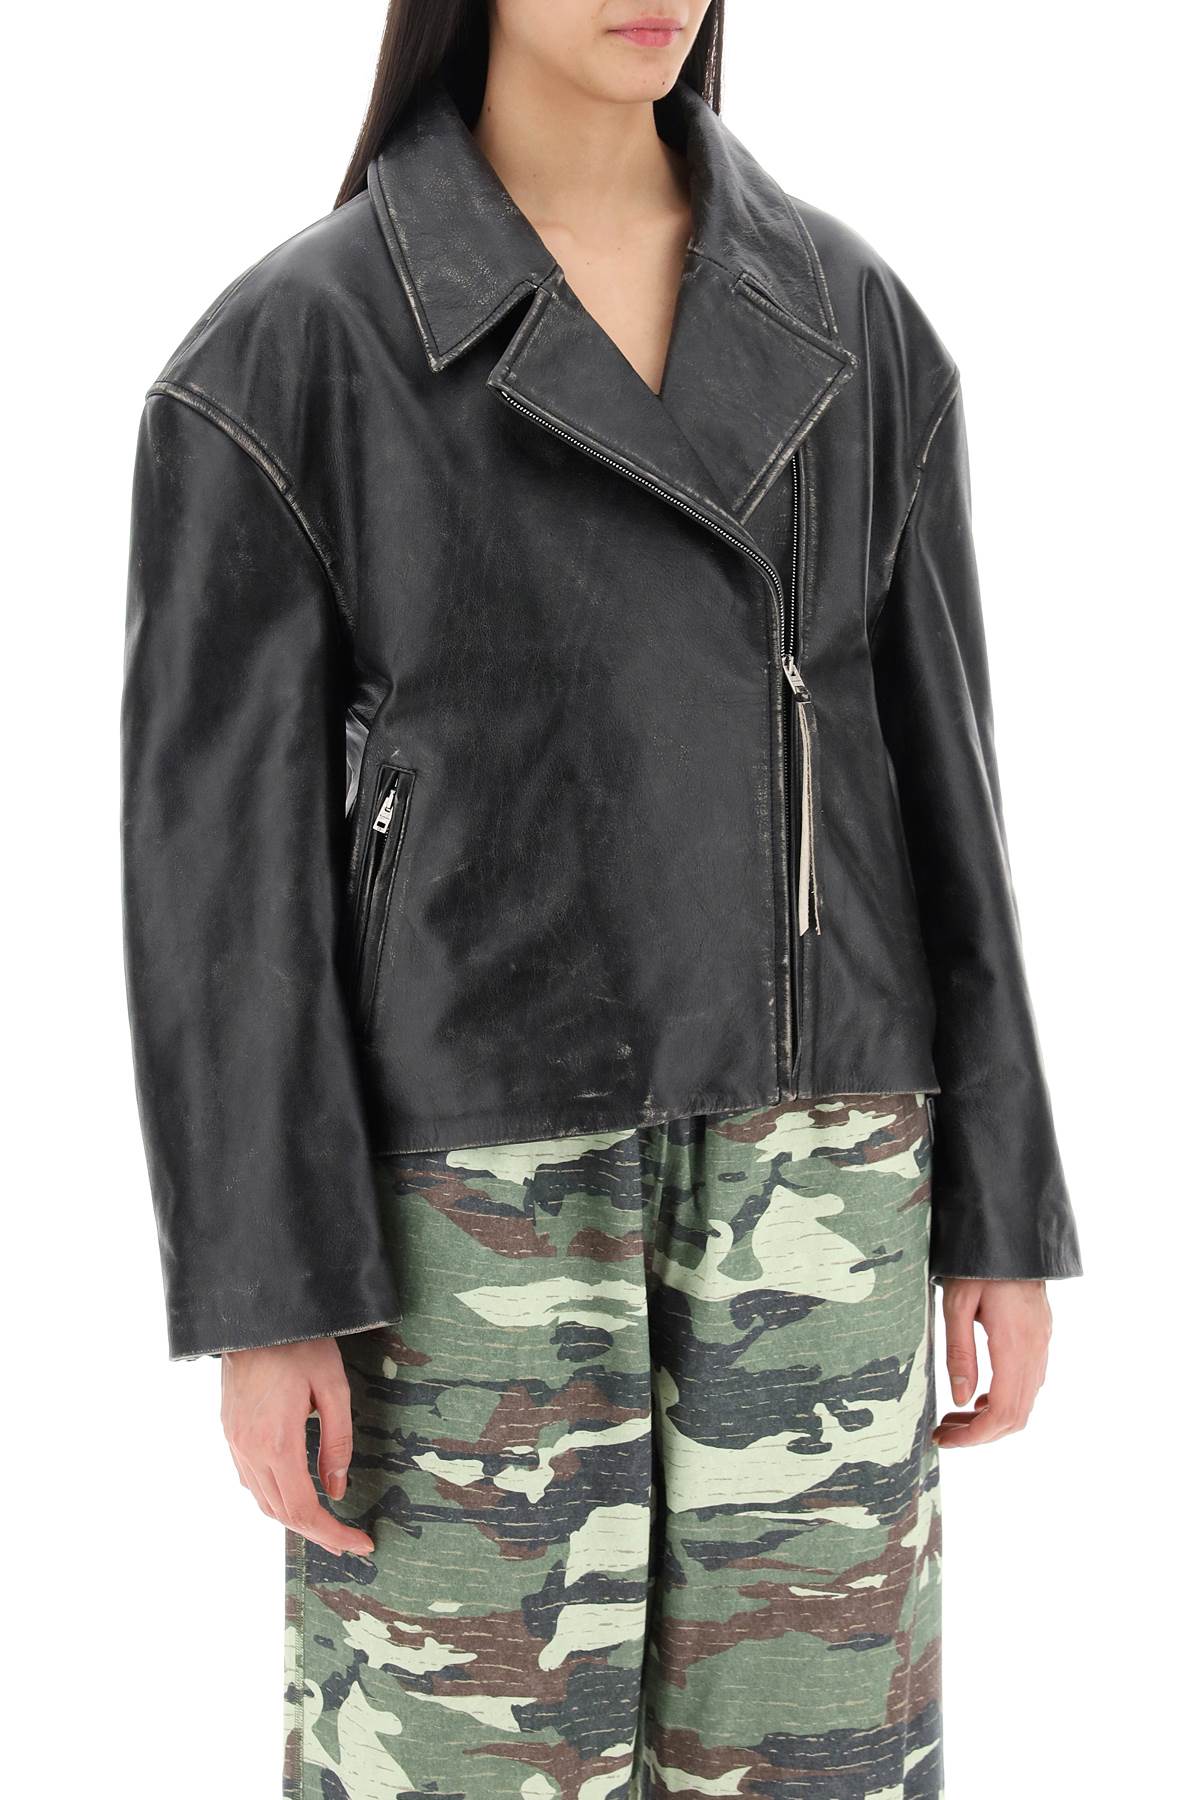 Shop Acne Studios Distressed Leather Biker Jacket With Mirrored Lapels For Women In Black